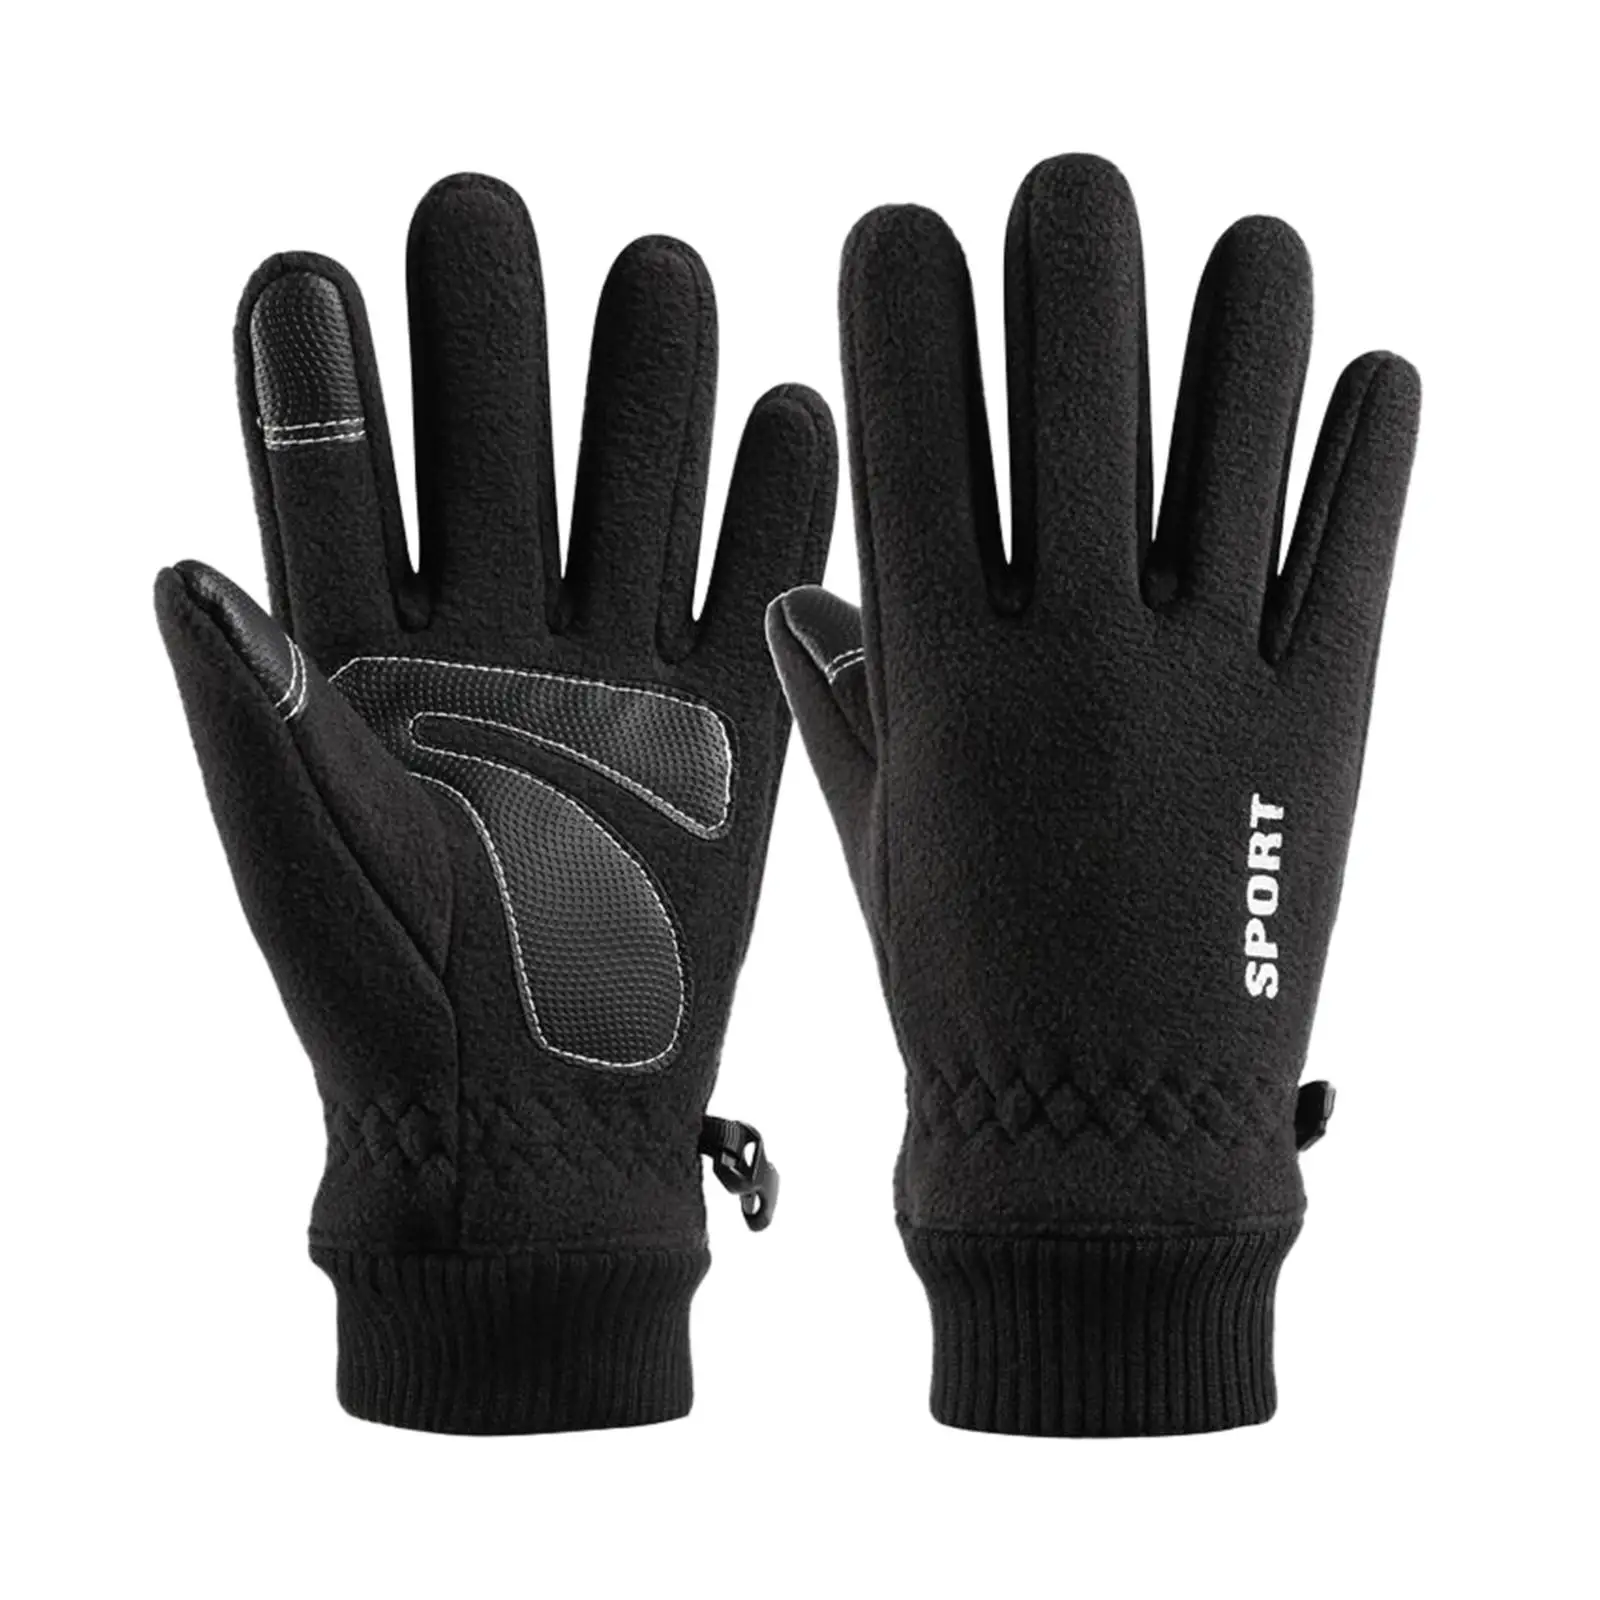 Winter Warm Gloves Thermal Gloves Hand Protection Touch Screen  Fleece for Running Camping Working Ski Men Women